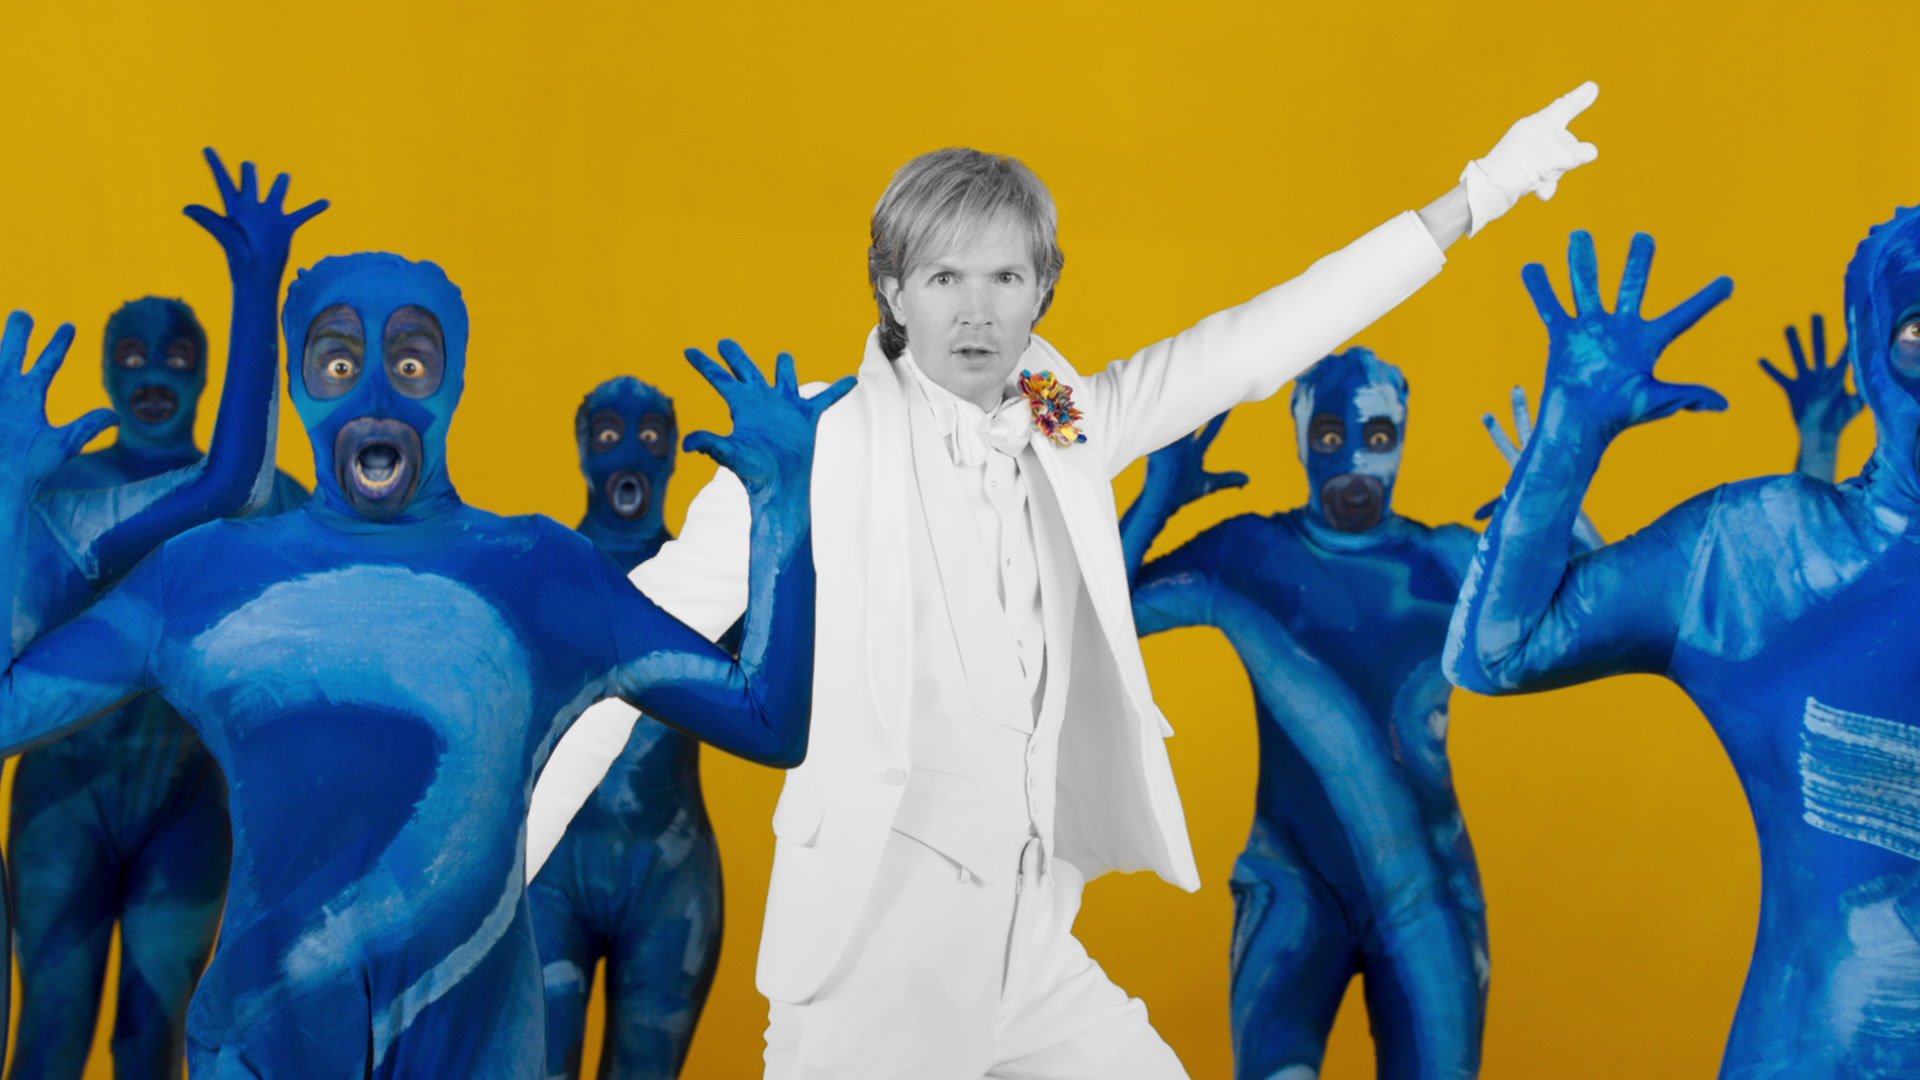 Feel the 'Colors' with Beck's Latest Music Video, Directed by Edgar Wright